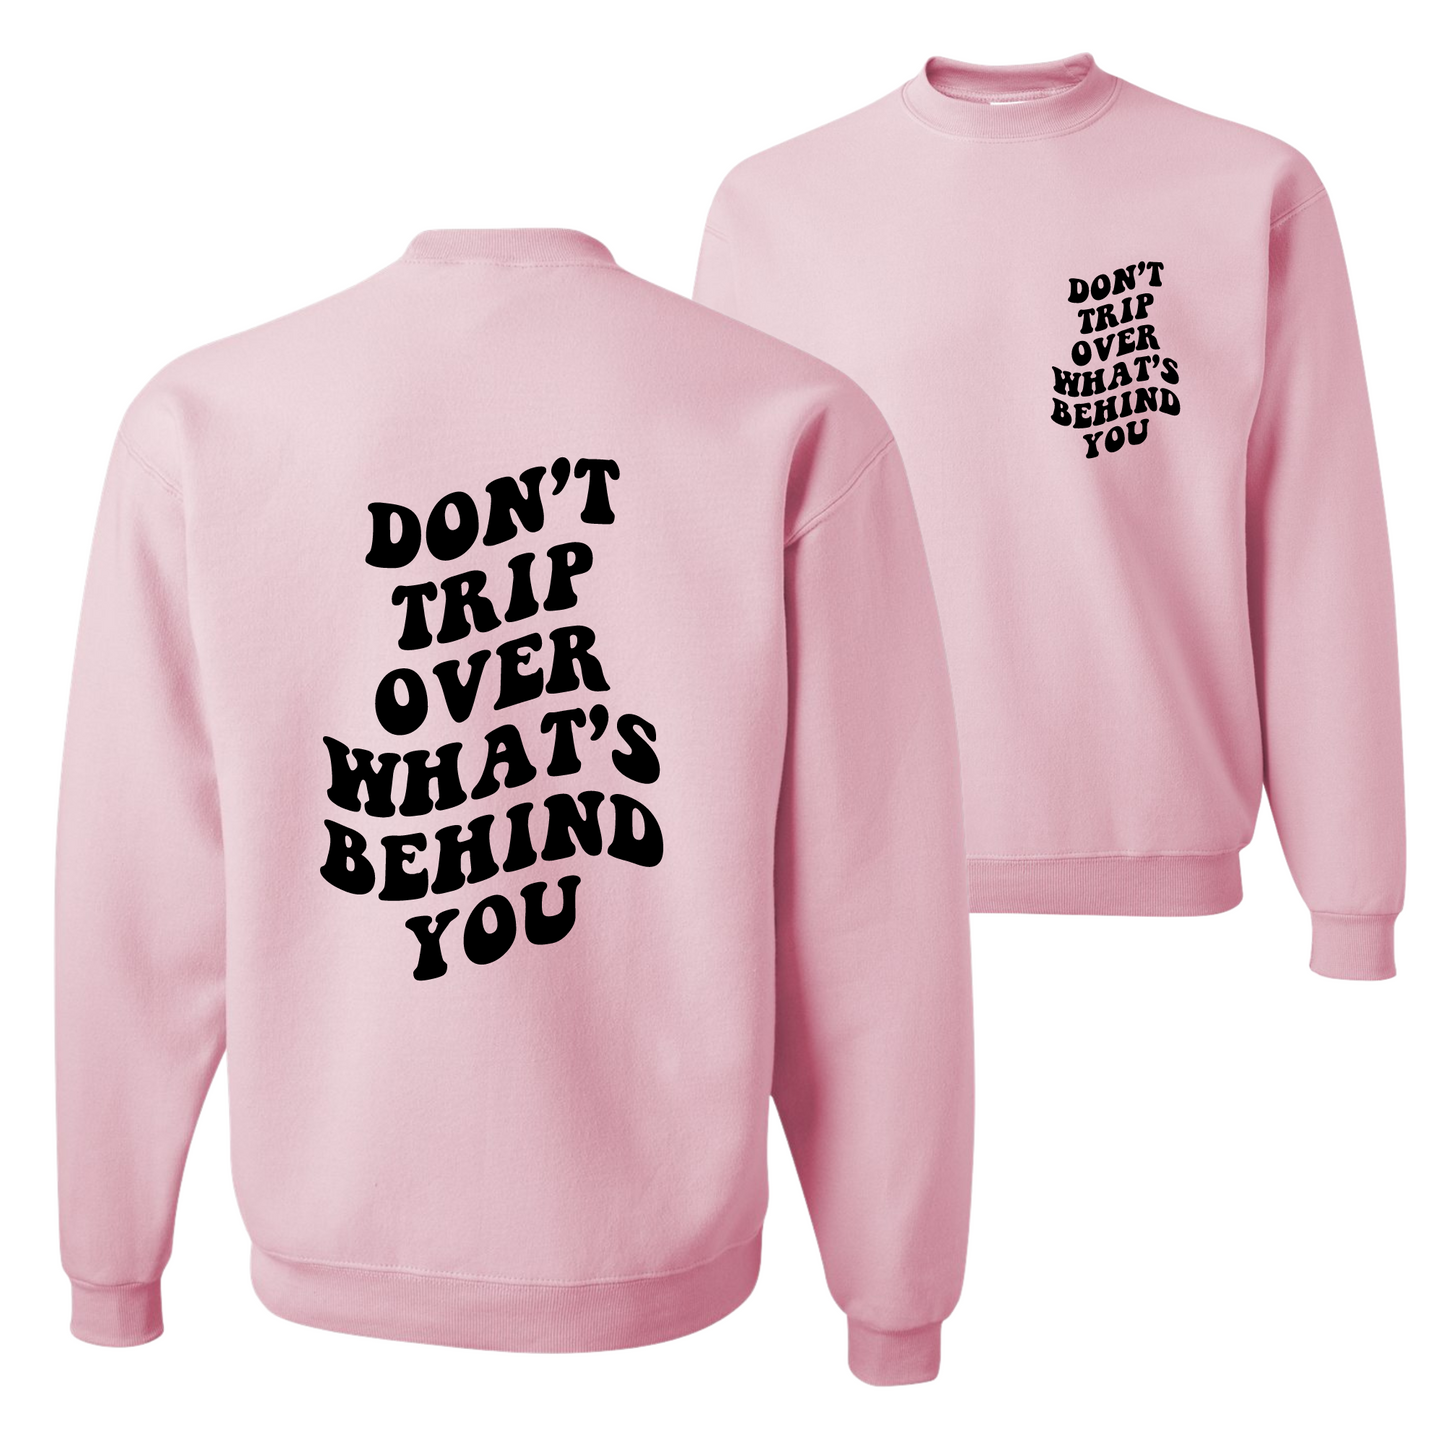 Resiliently Bold Don't Trip Over What's Behind You Light Pink Unisex Crewneck Sweatshirt